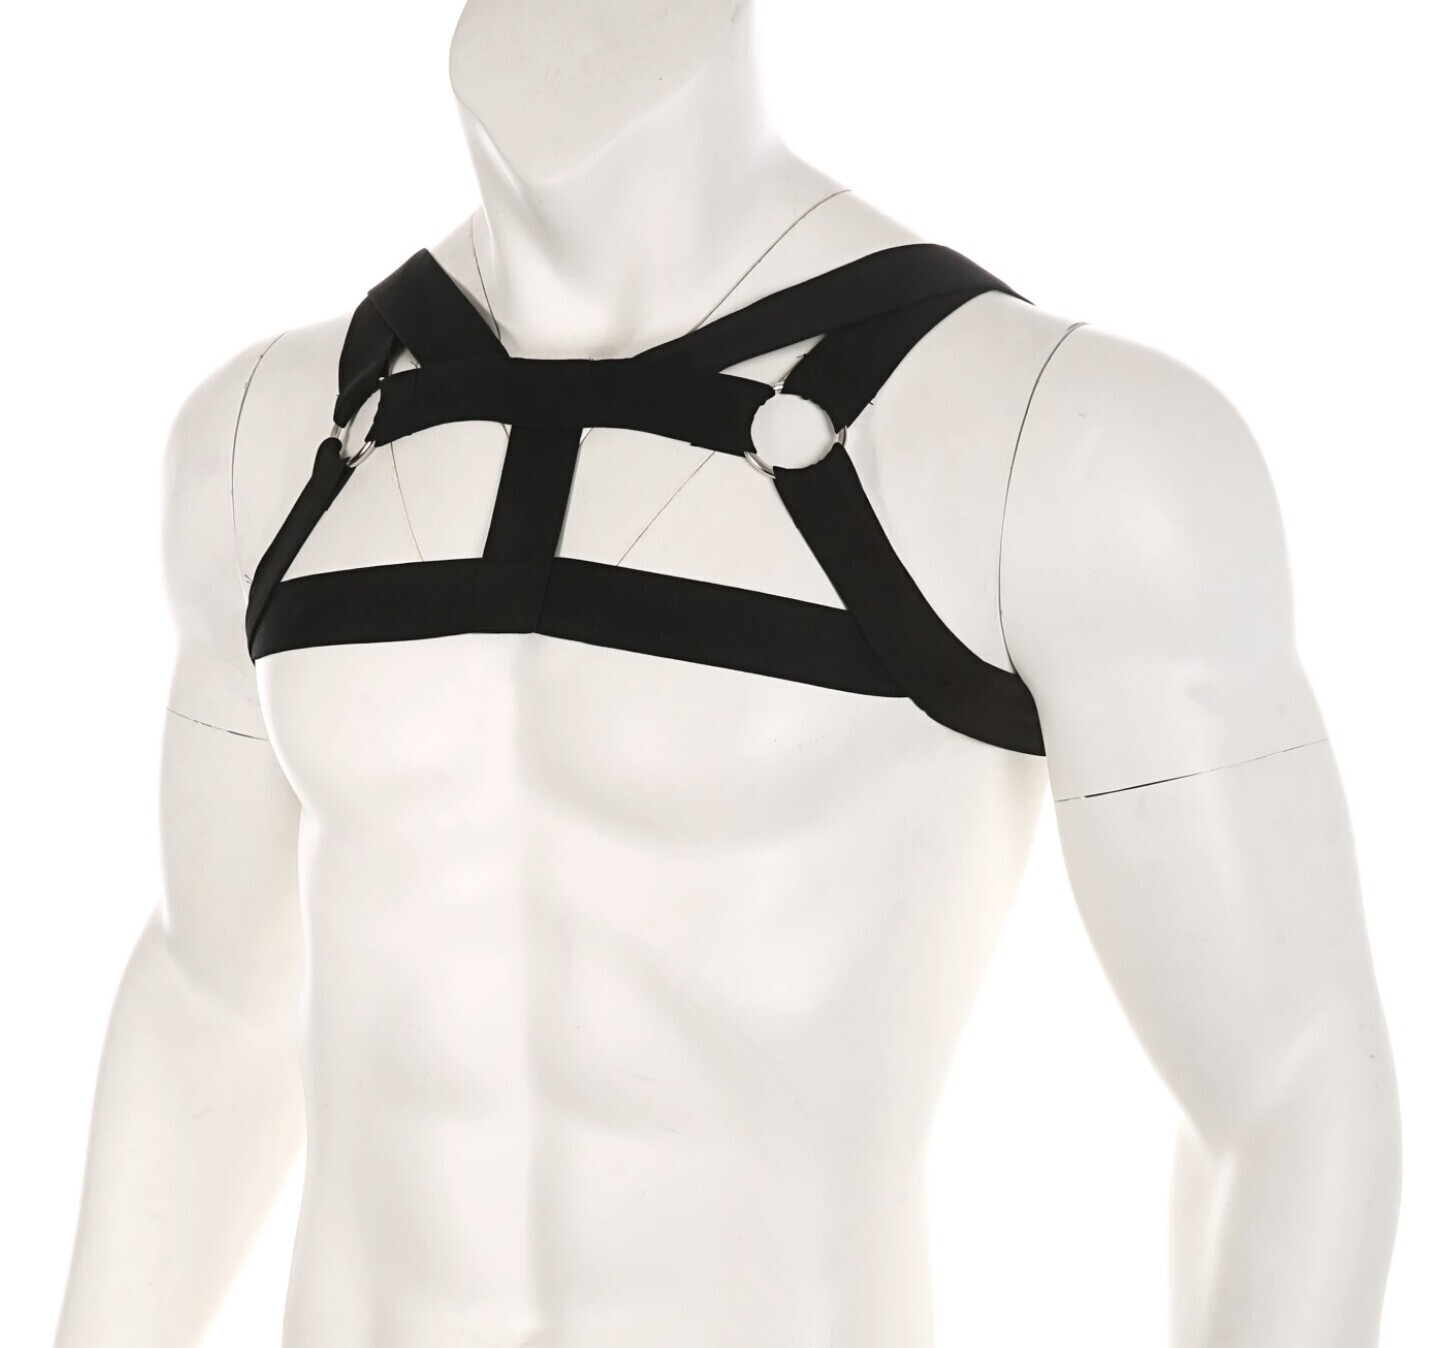 MENMODE Men's Body Chest Harness with Metal Ring